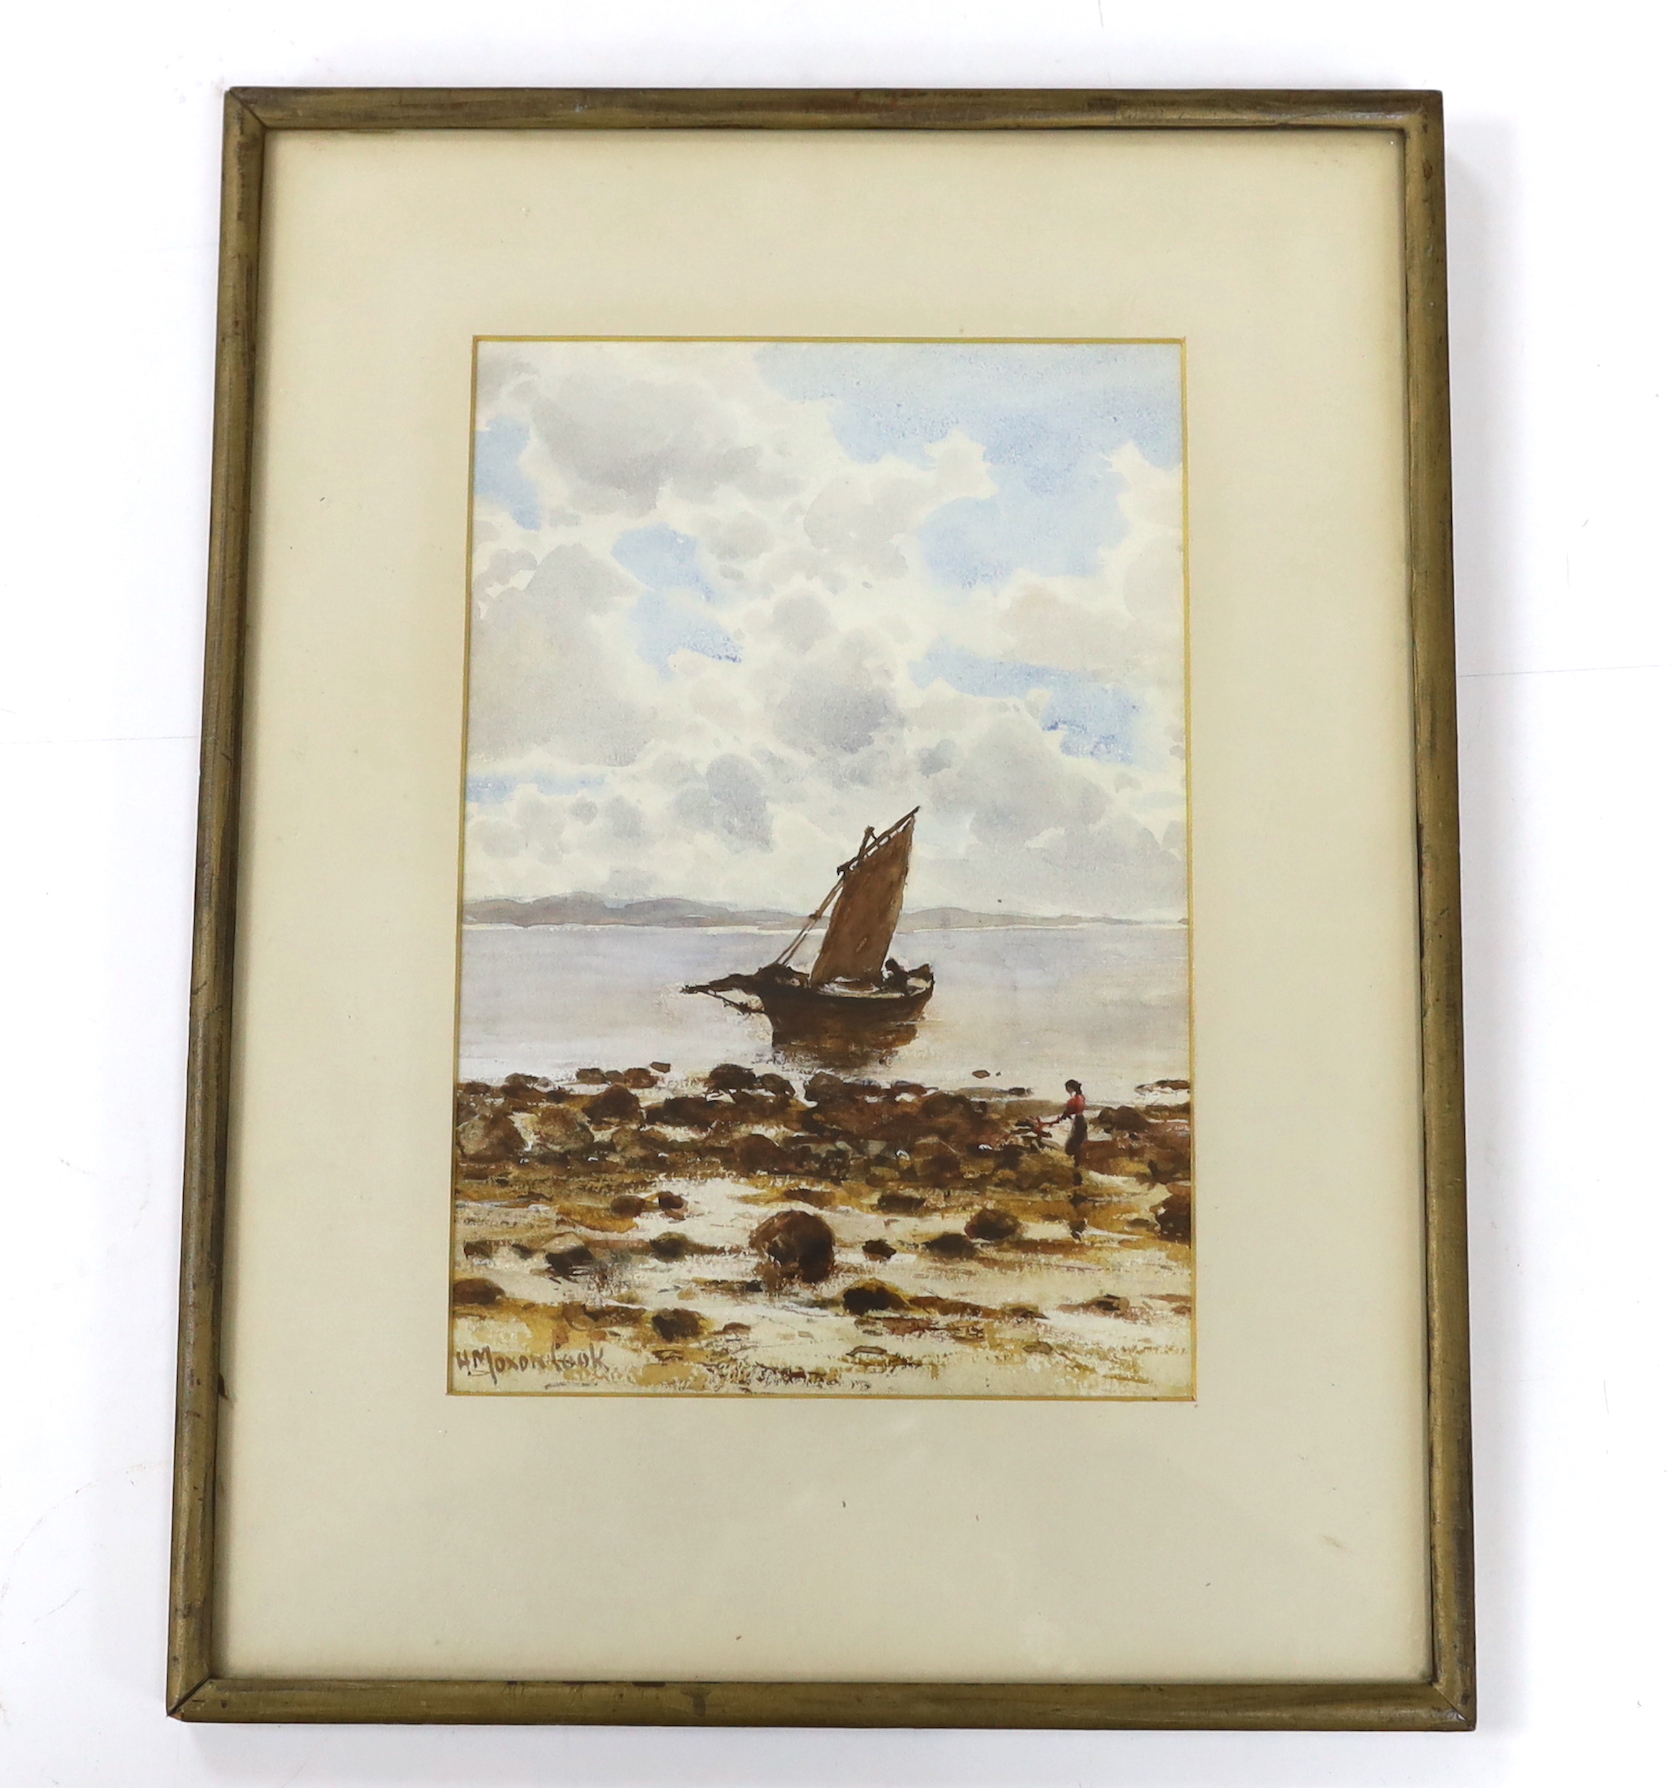 Herbert Moxon Cook (1844-1928), watercolour, Coastal scene with fishing boat, signed, indistinctly inscribed in ink verso, 26 x 17cm